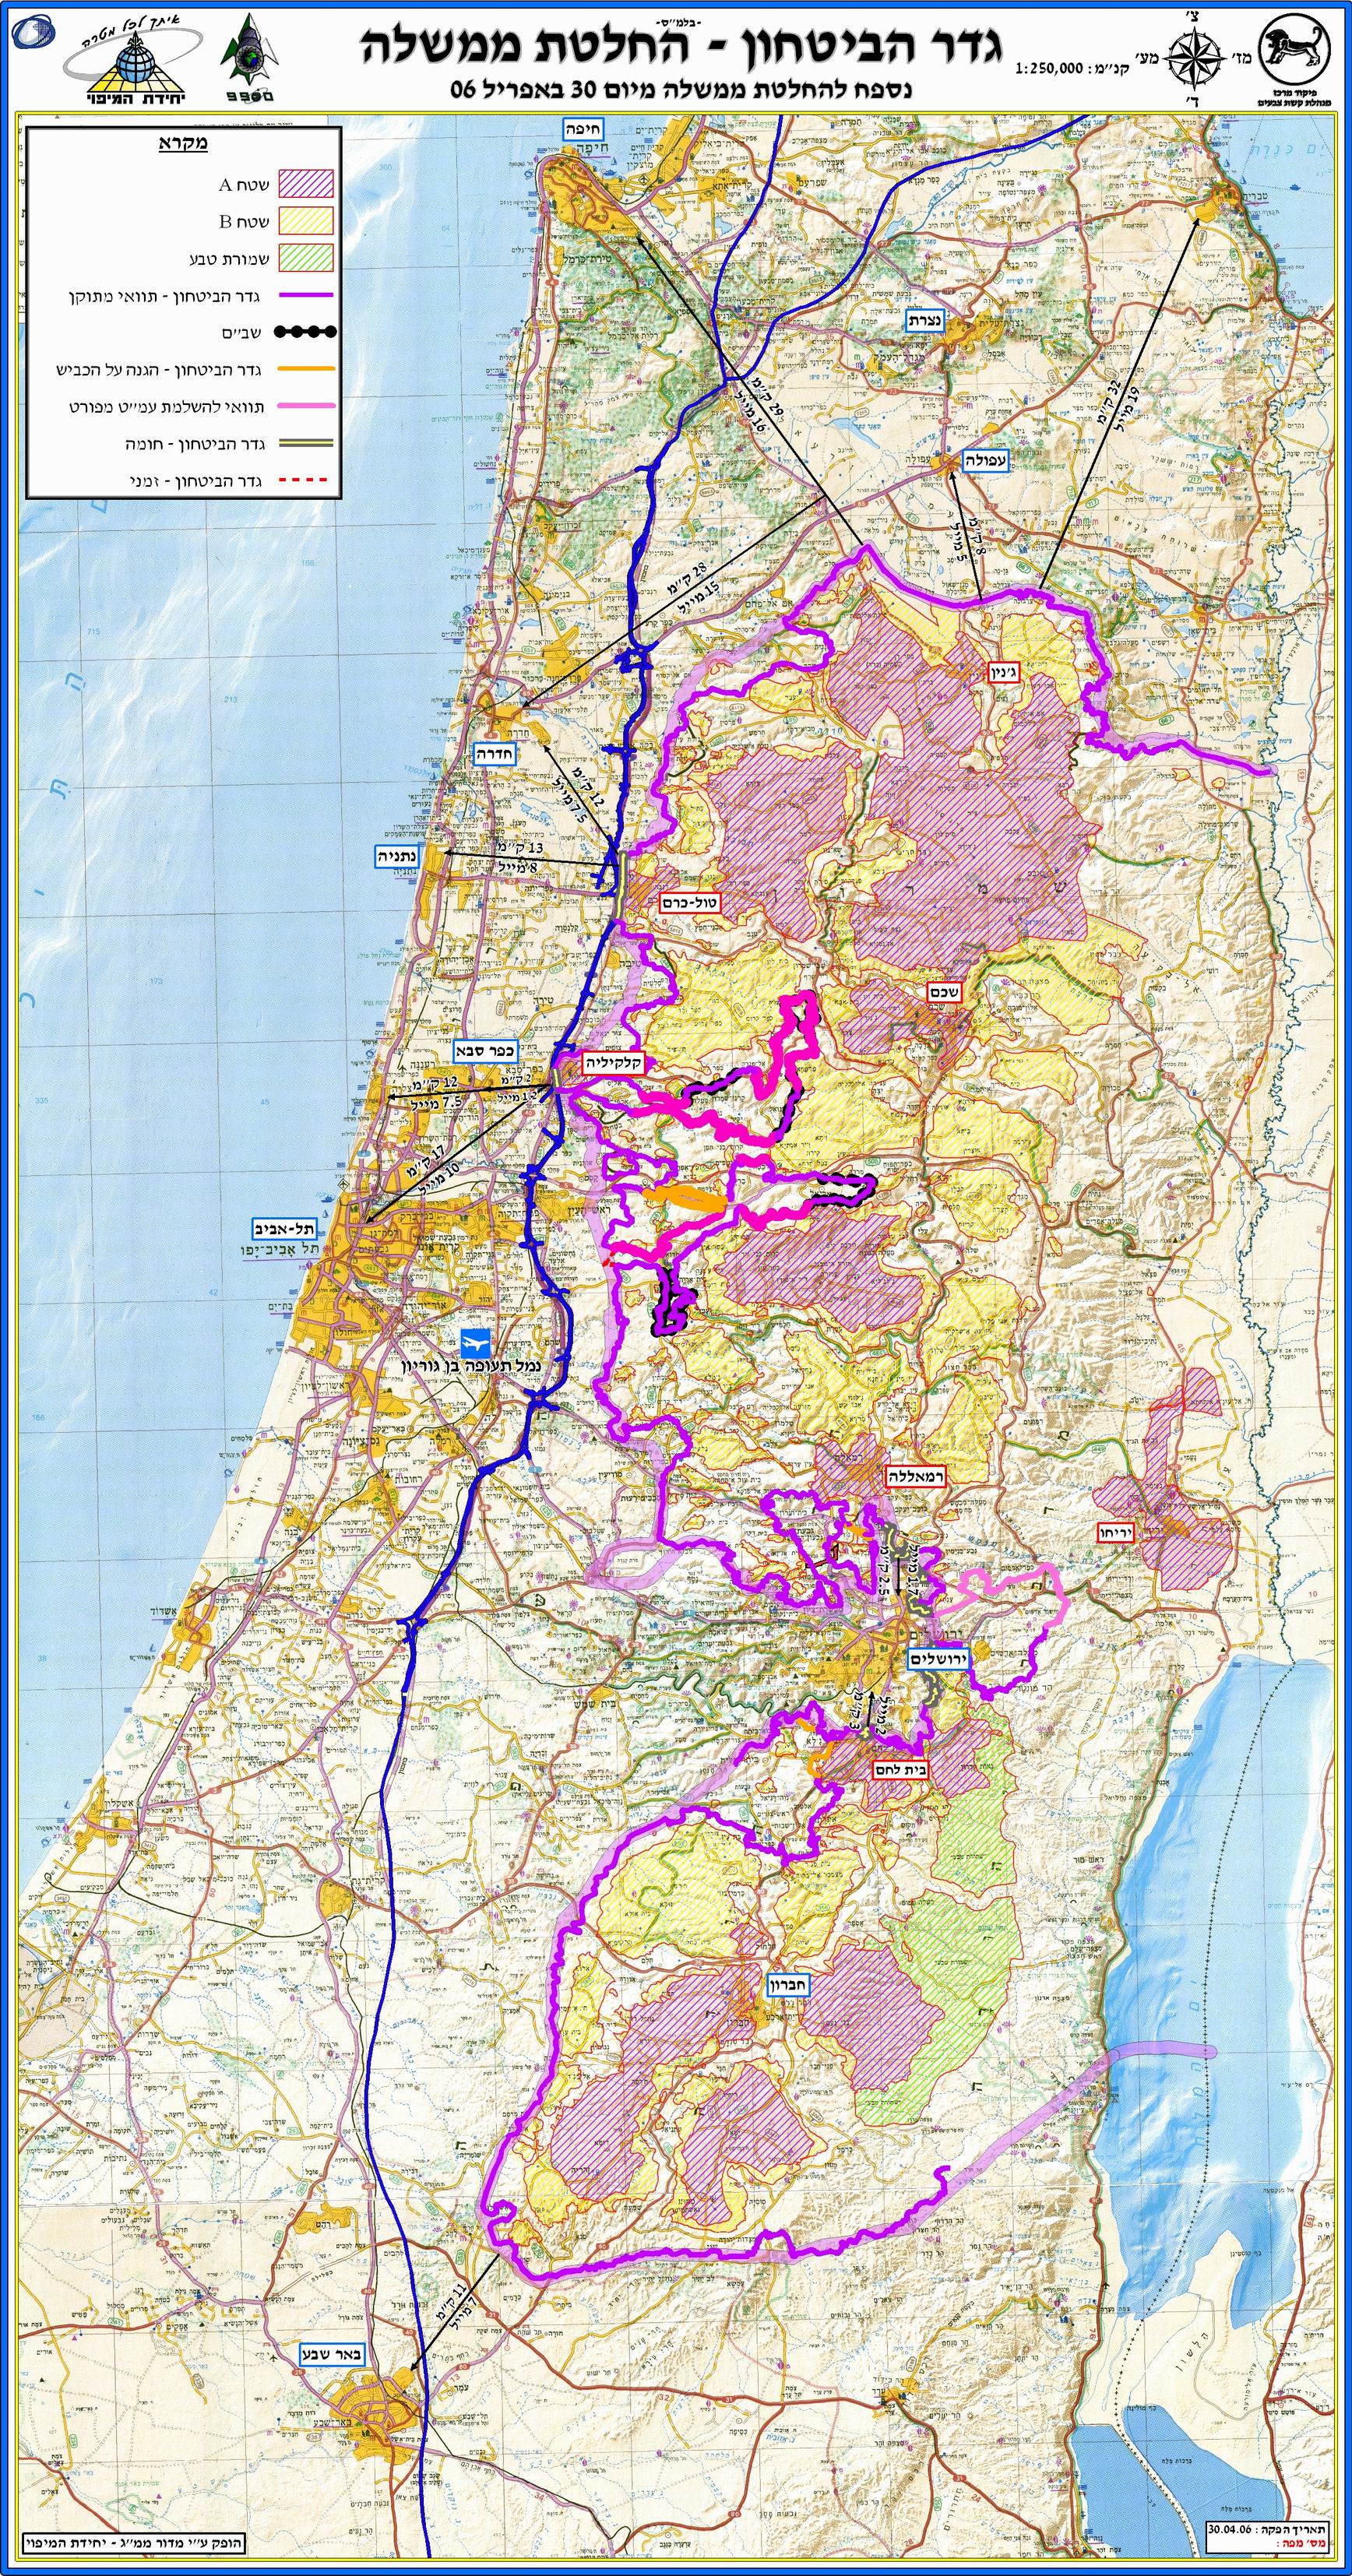 Government of Israel Resolution 4783 on the Separation Barrier - Map - Hebrew